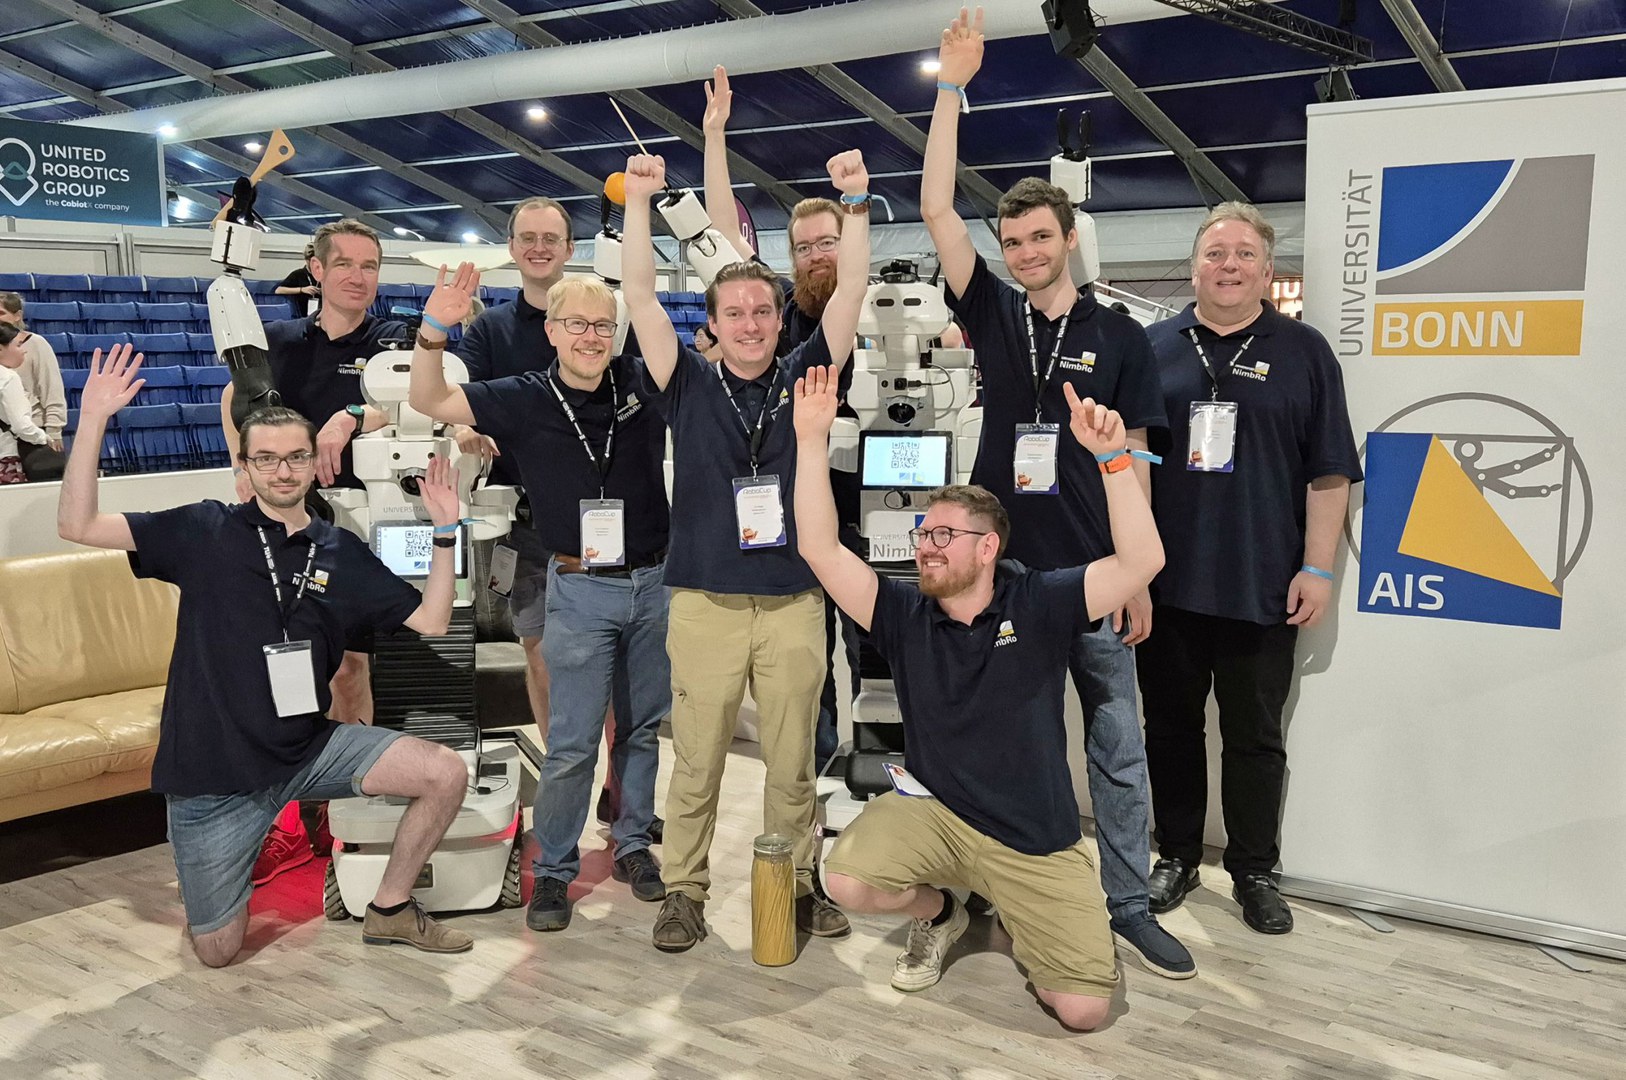 Team NimbRo from the University of Bonn has won the RoboCup@Home world championship for household robots.